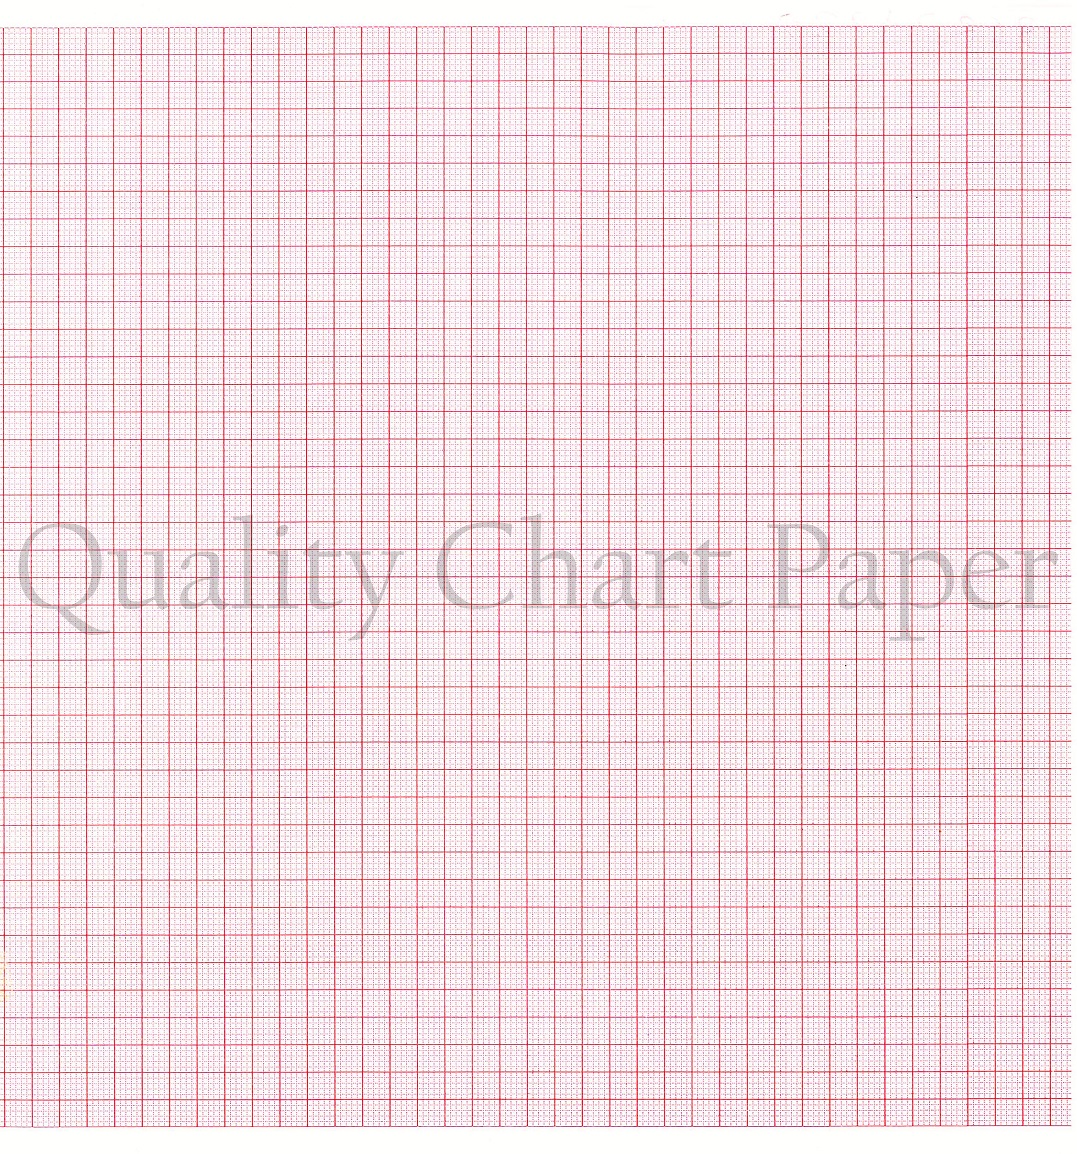 BIOCARE 1230 ECG 1210 210MM X 20M - Quality Chart Paper - Your Go to Source  for Quality ECG Paper